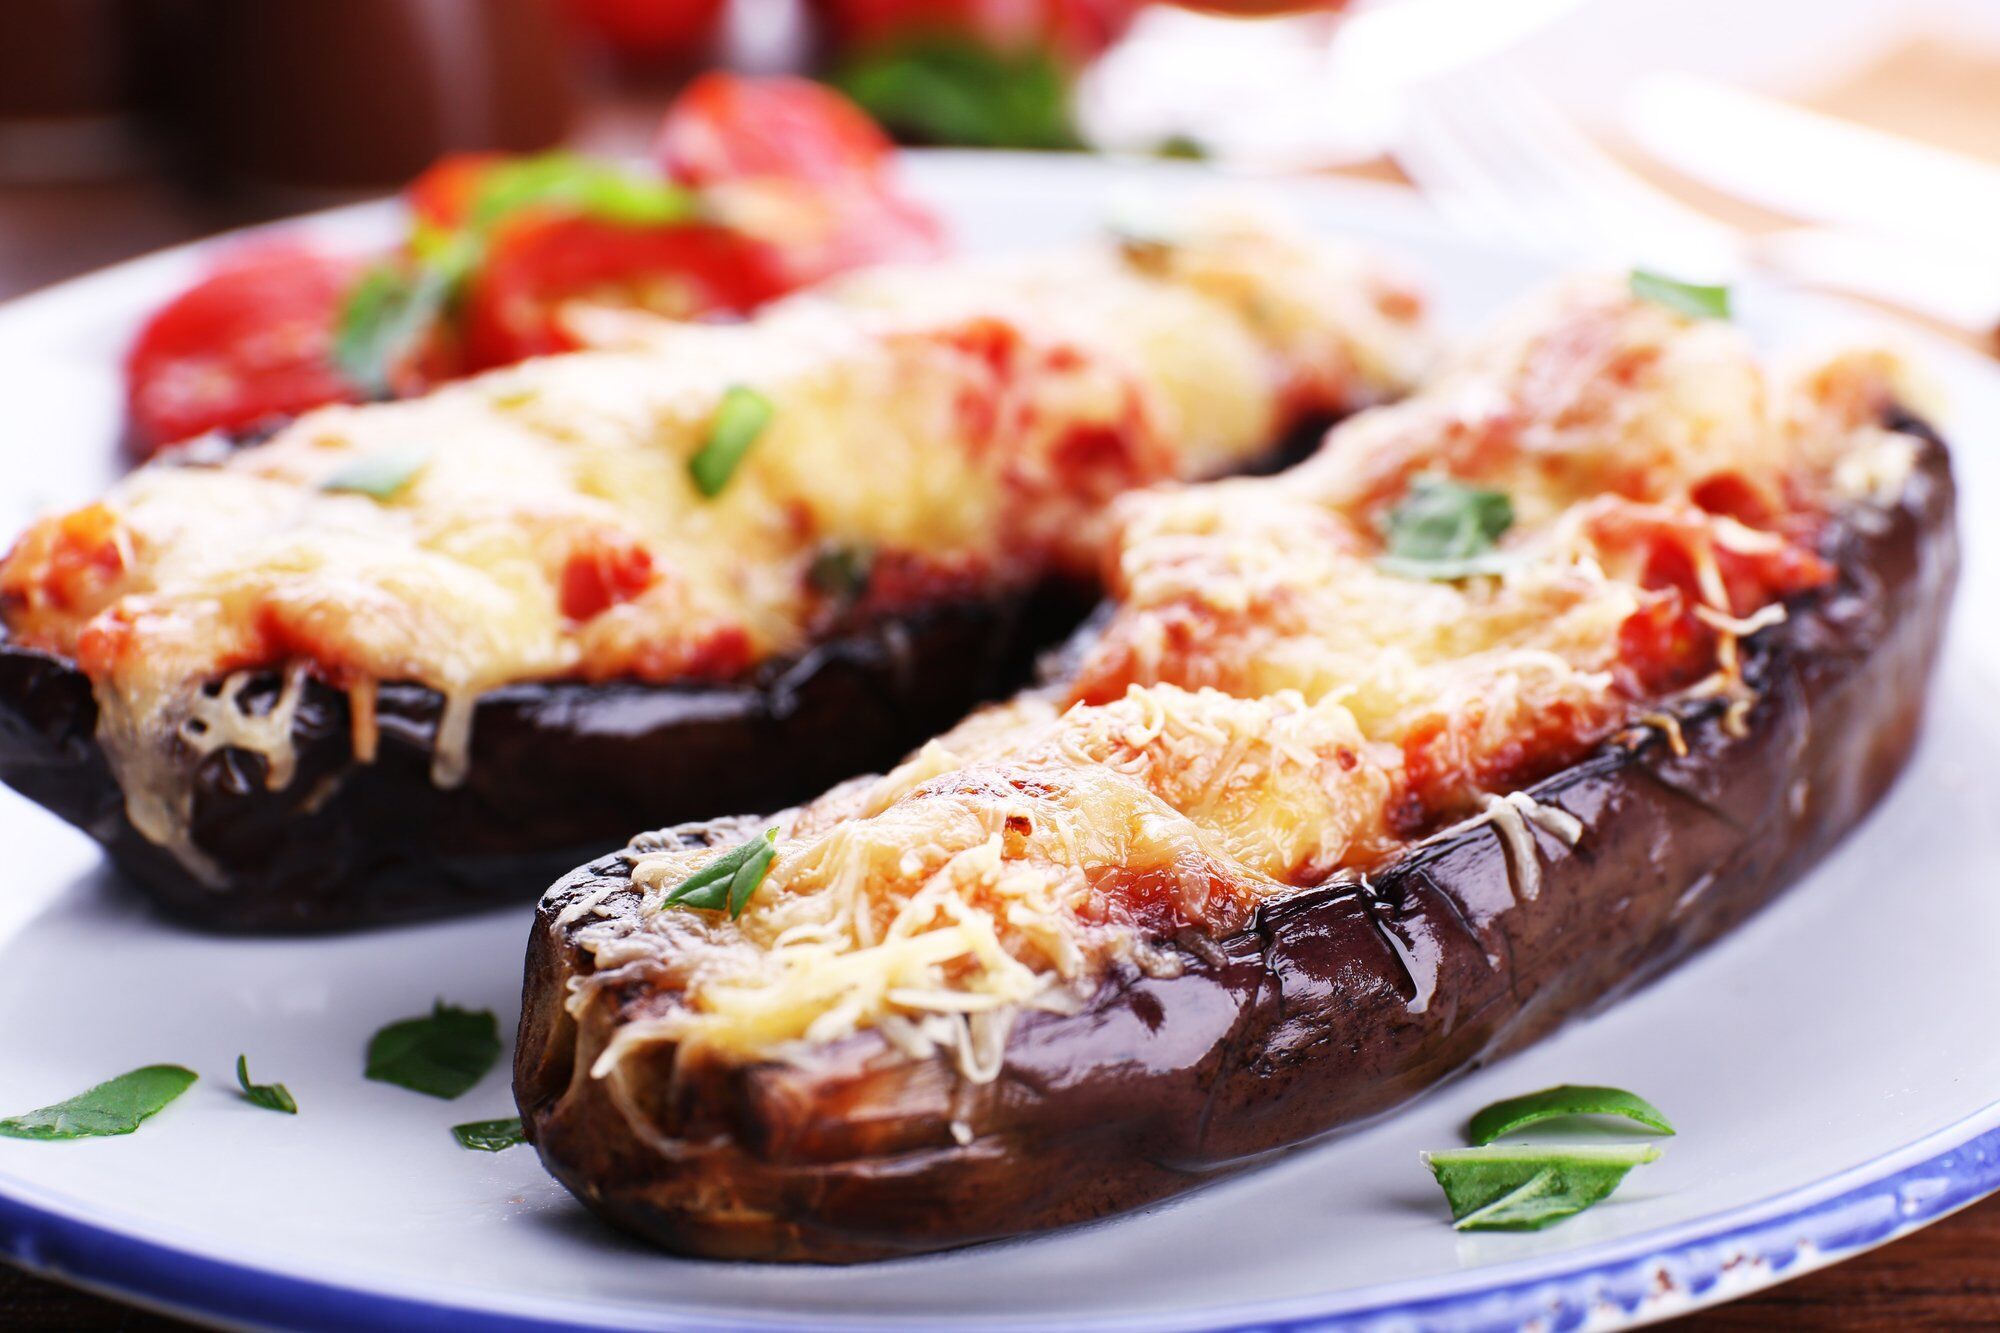 Baked eggplant with cheese